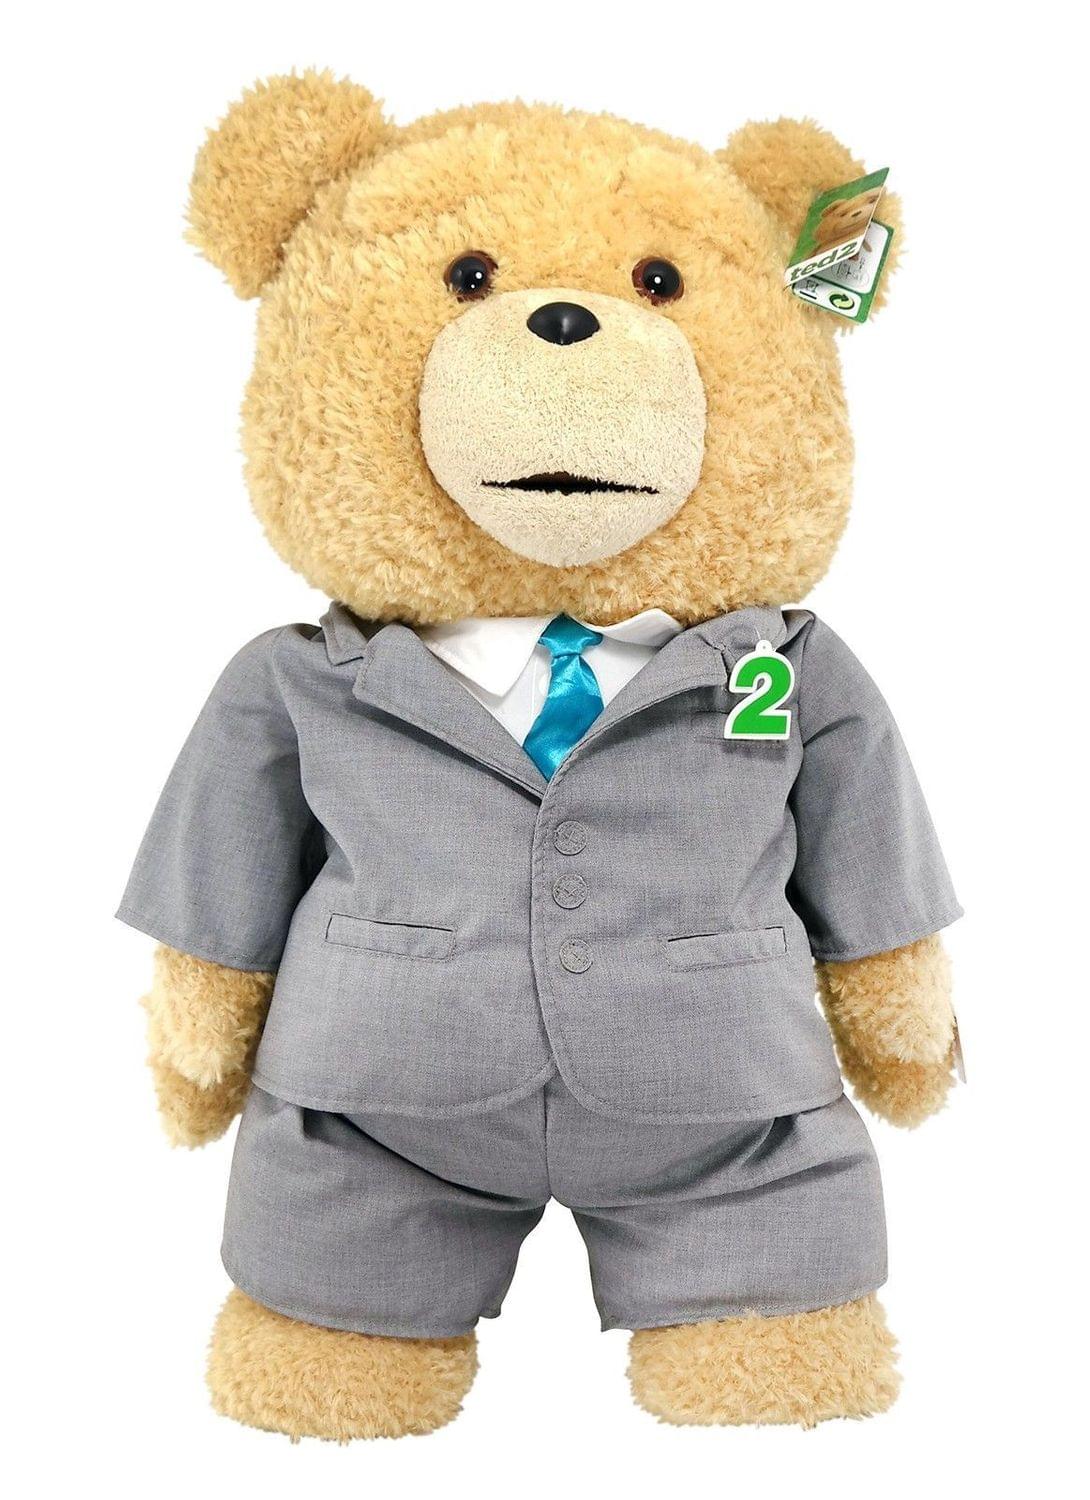 Ted 2 Talking Ted In Suit 24 Inch Plush Teddy Bear - Rated PG